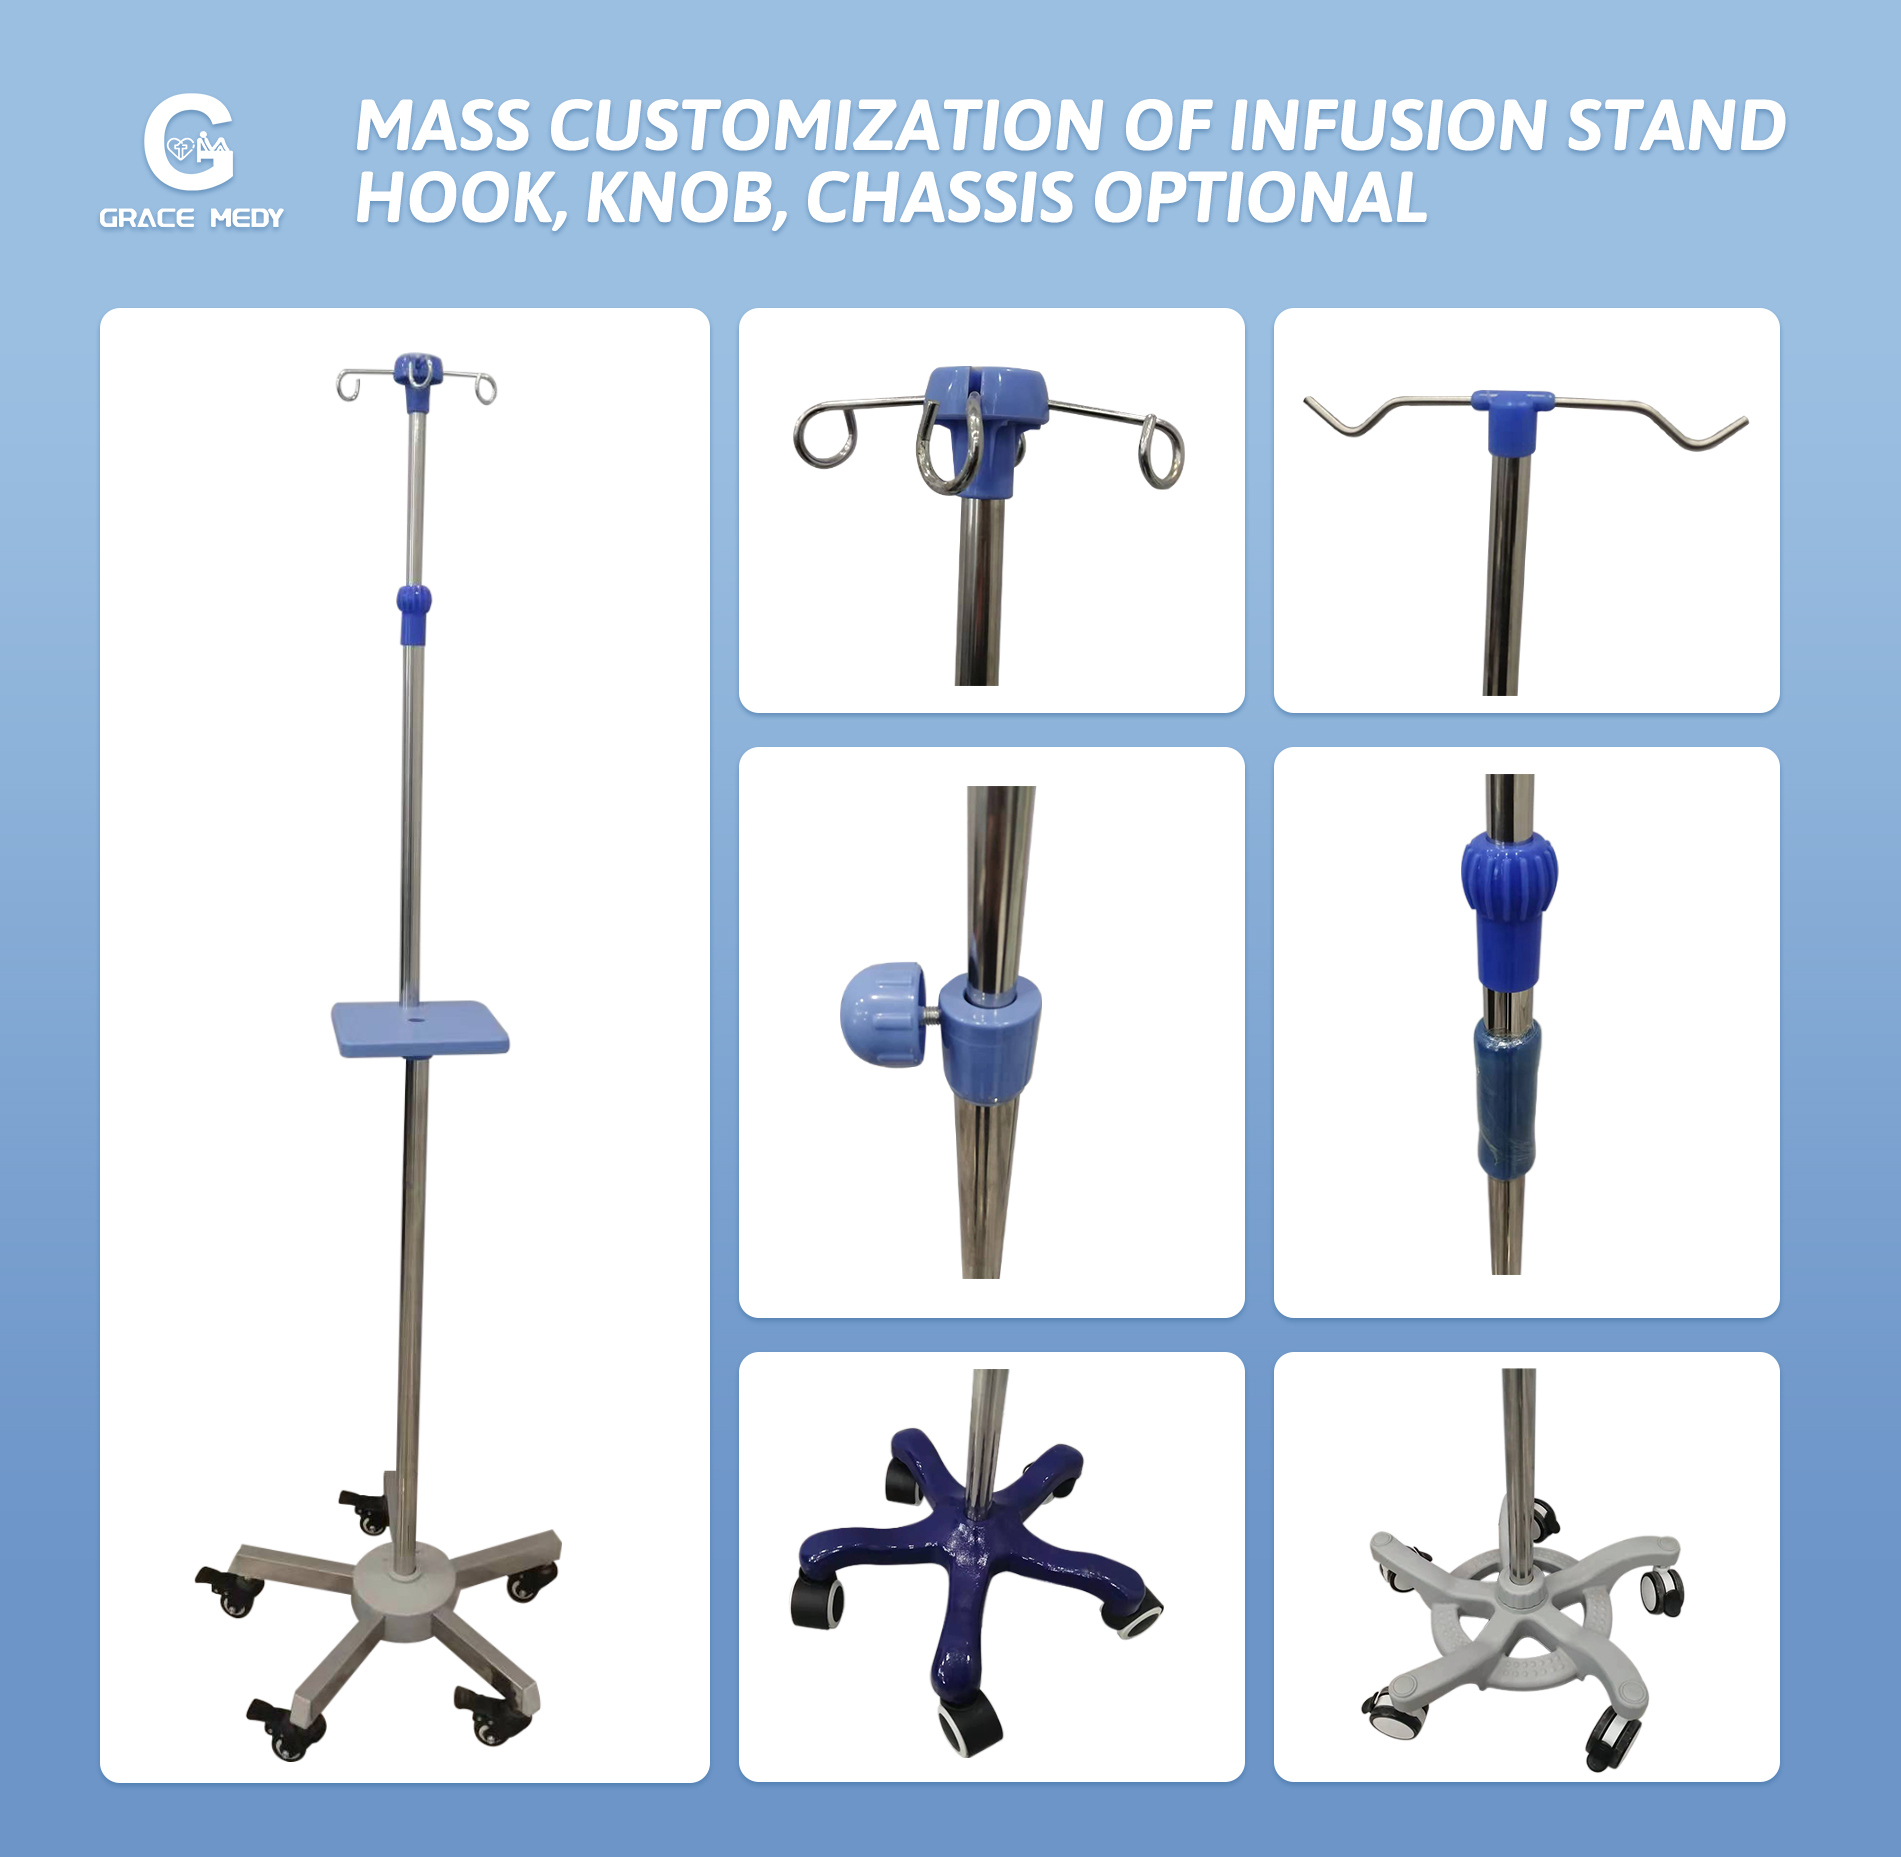 The structure of the infusion stand